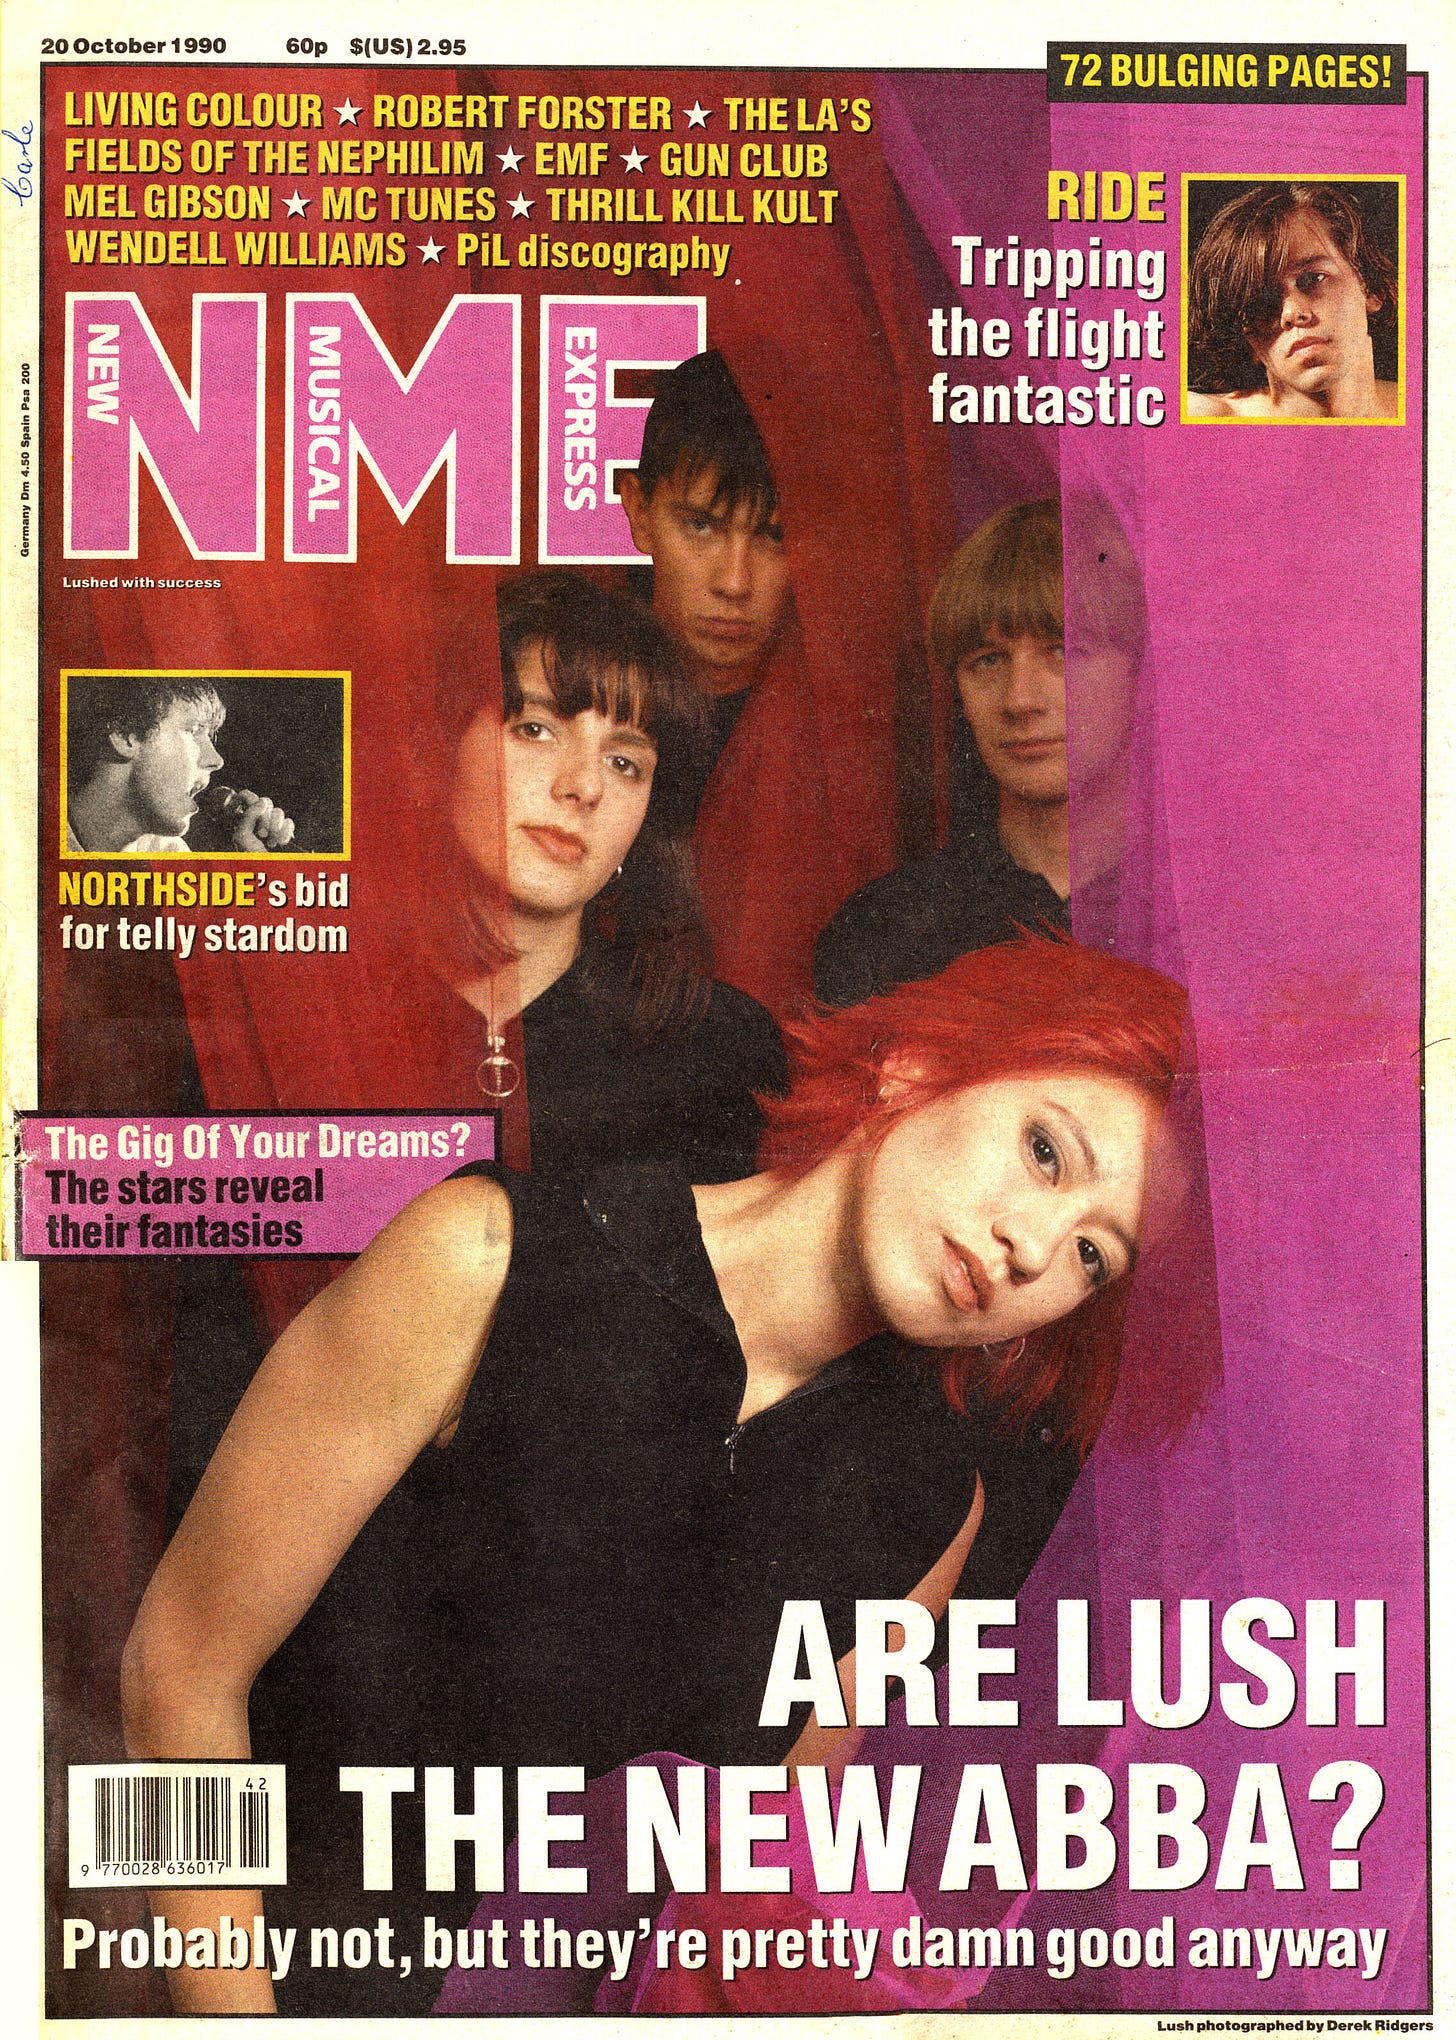 An interview with Miki Berenyi of Lush — James McMahon